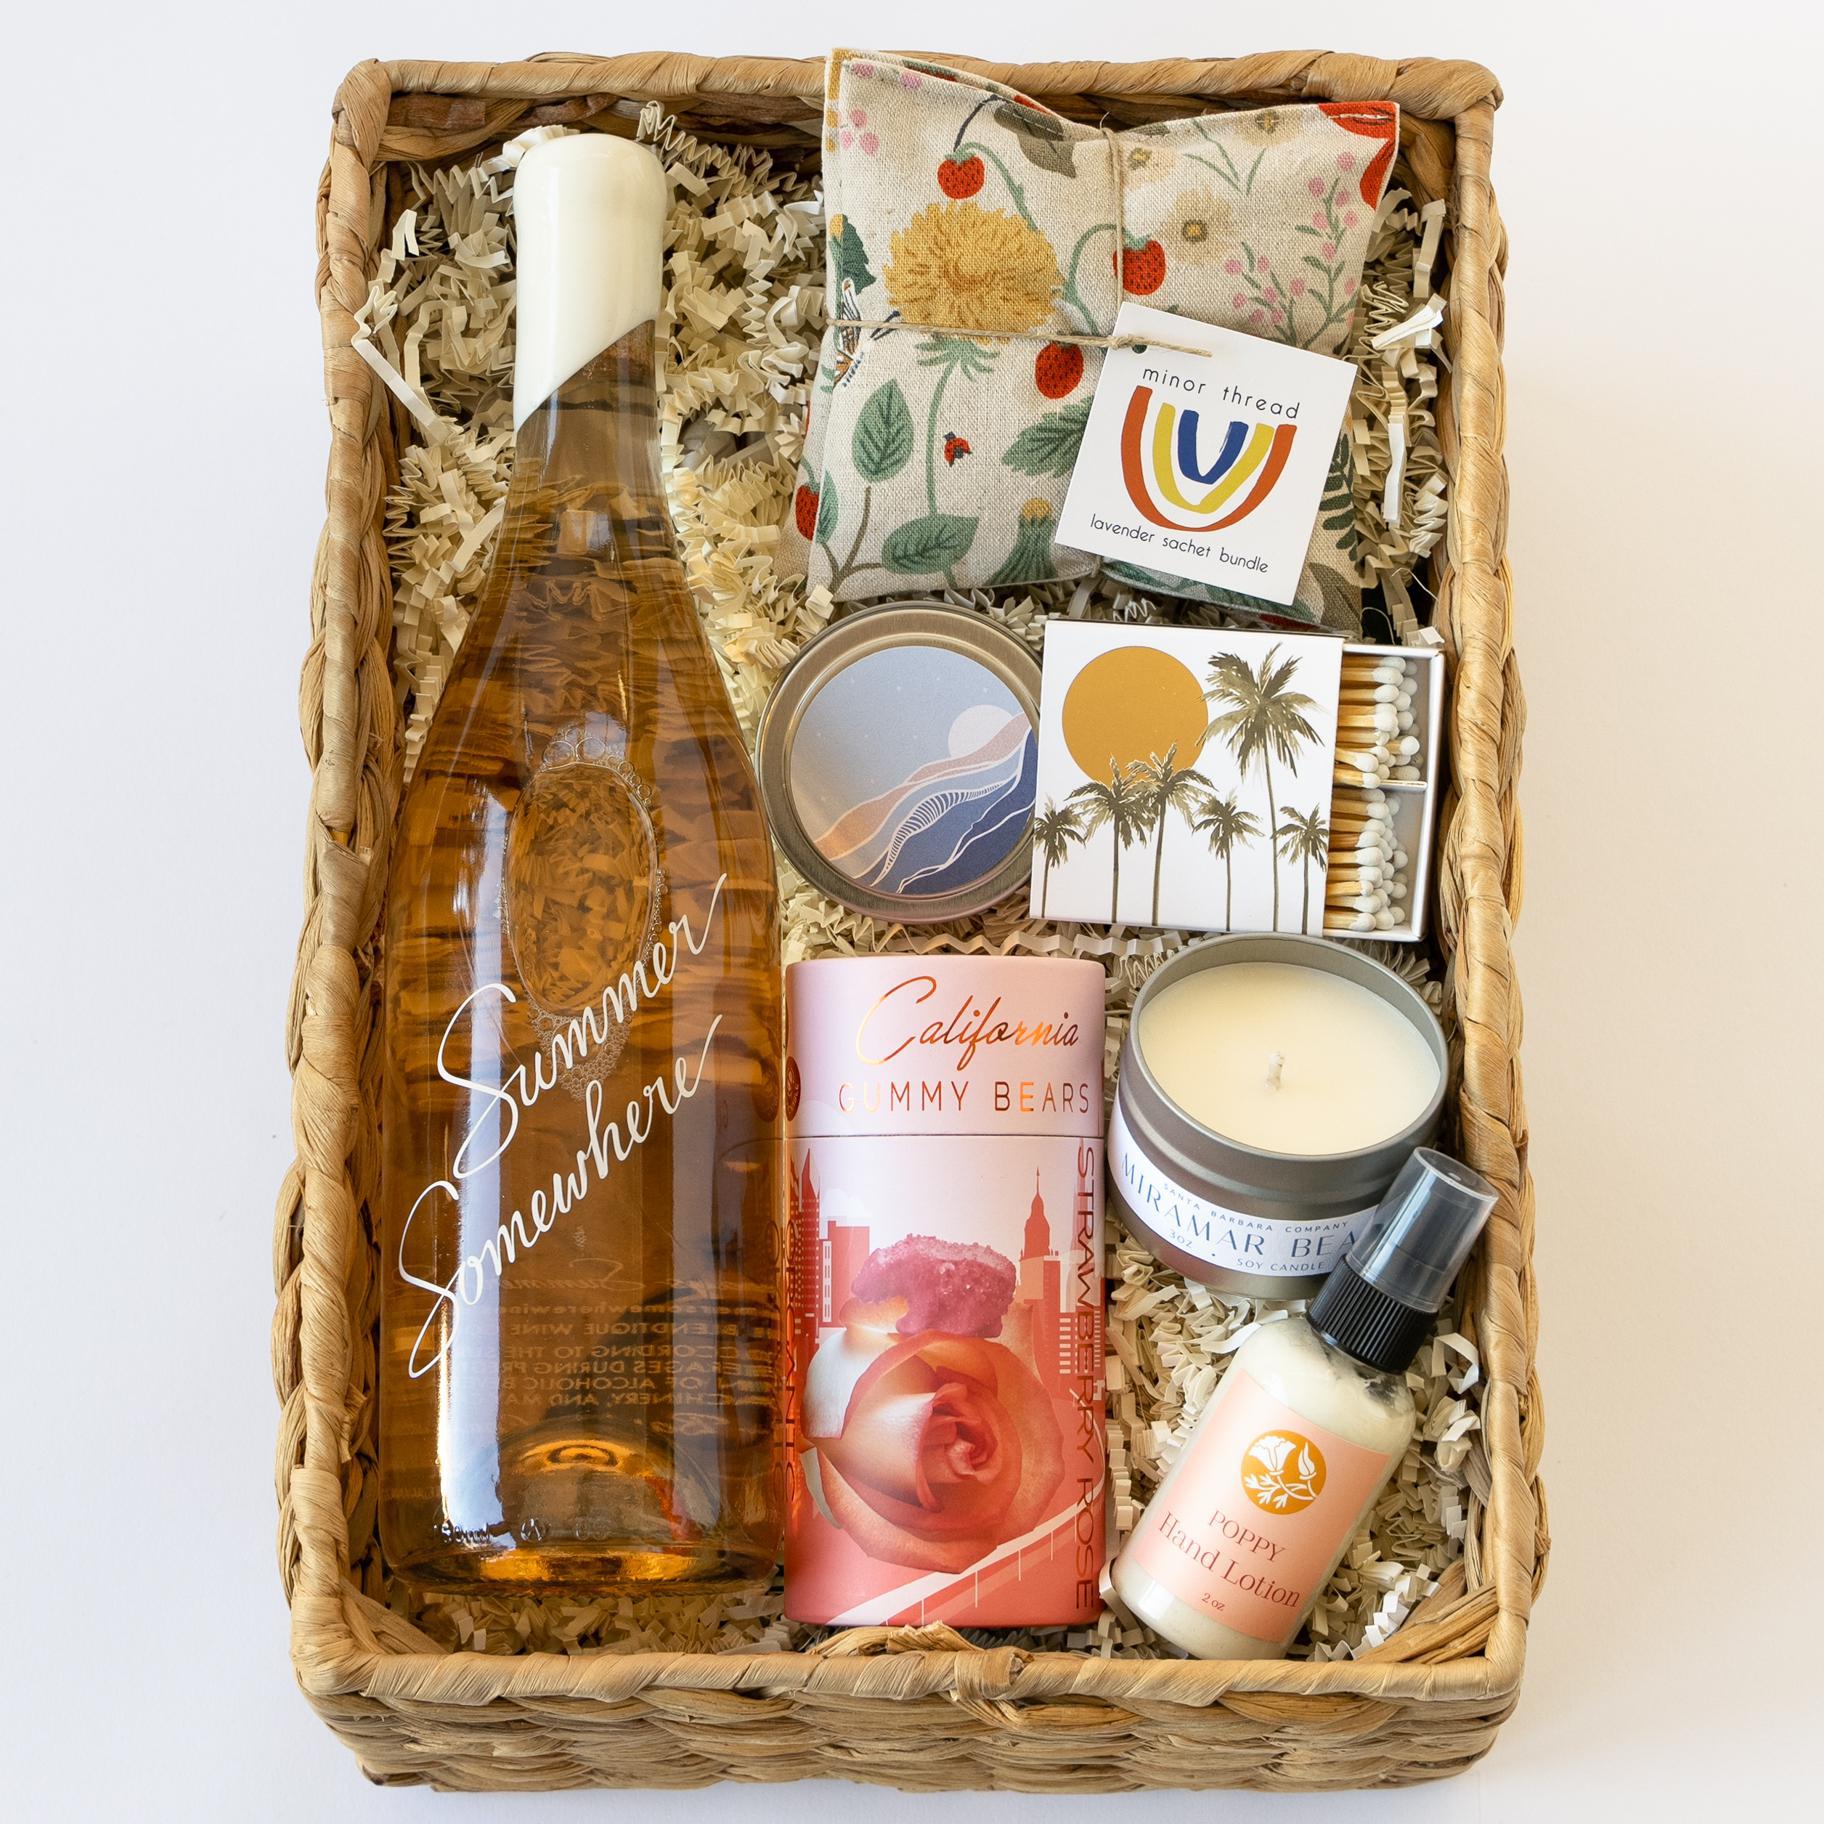 Summer somewhere gift basket with rosé, gummy bears, lotion, a candle, matched, and lavender sachets in a woven basket